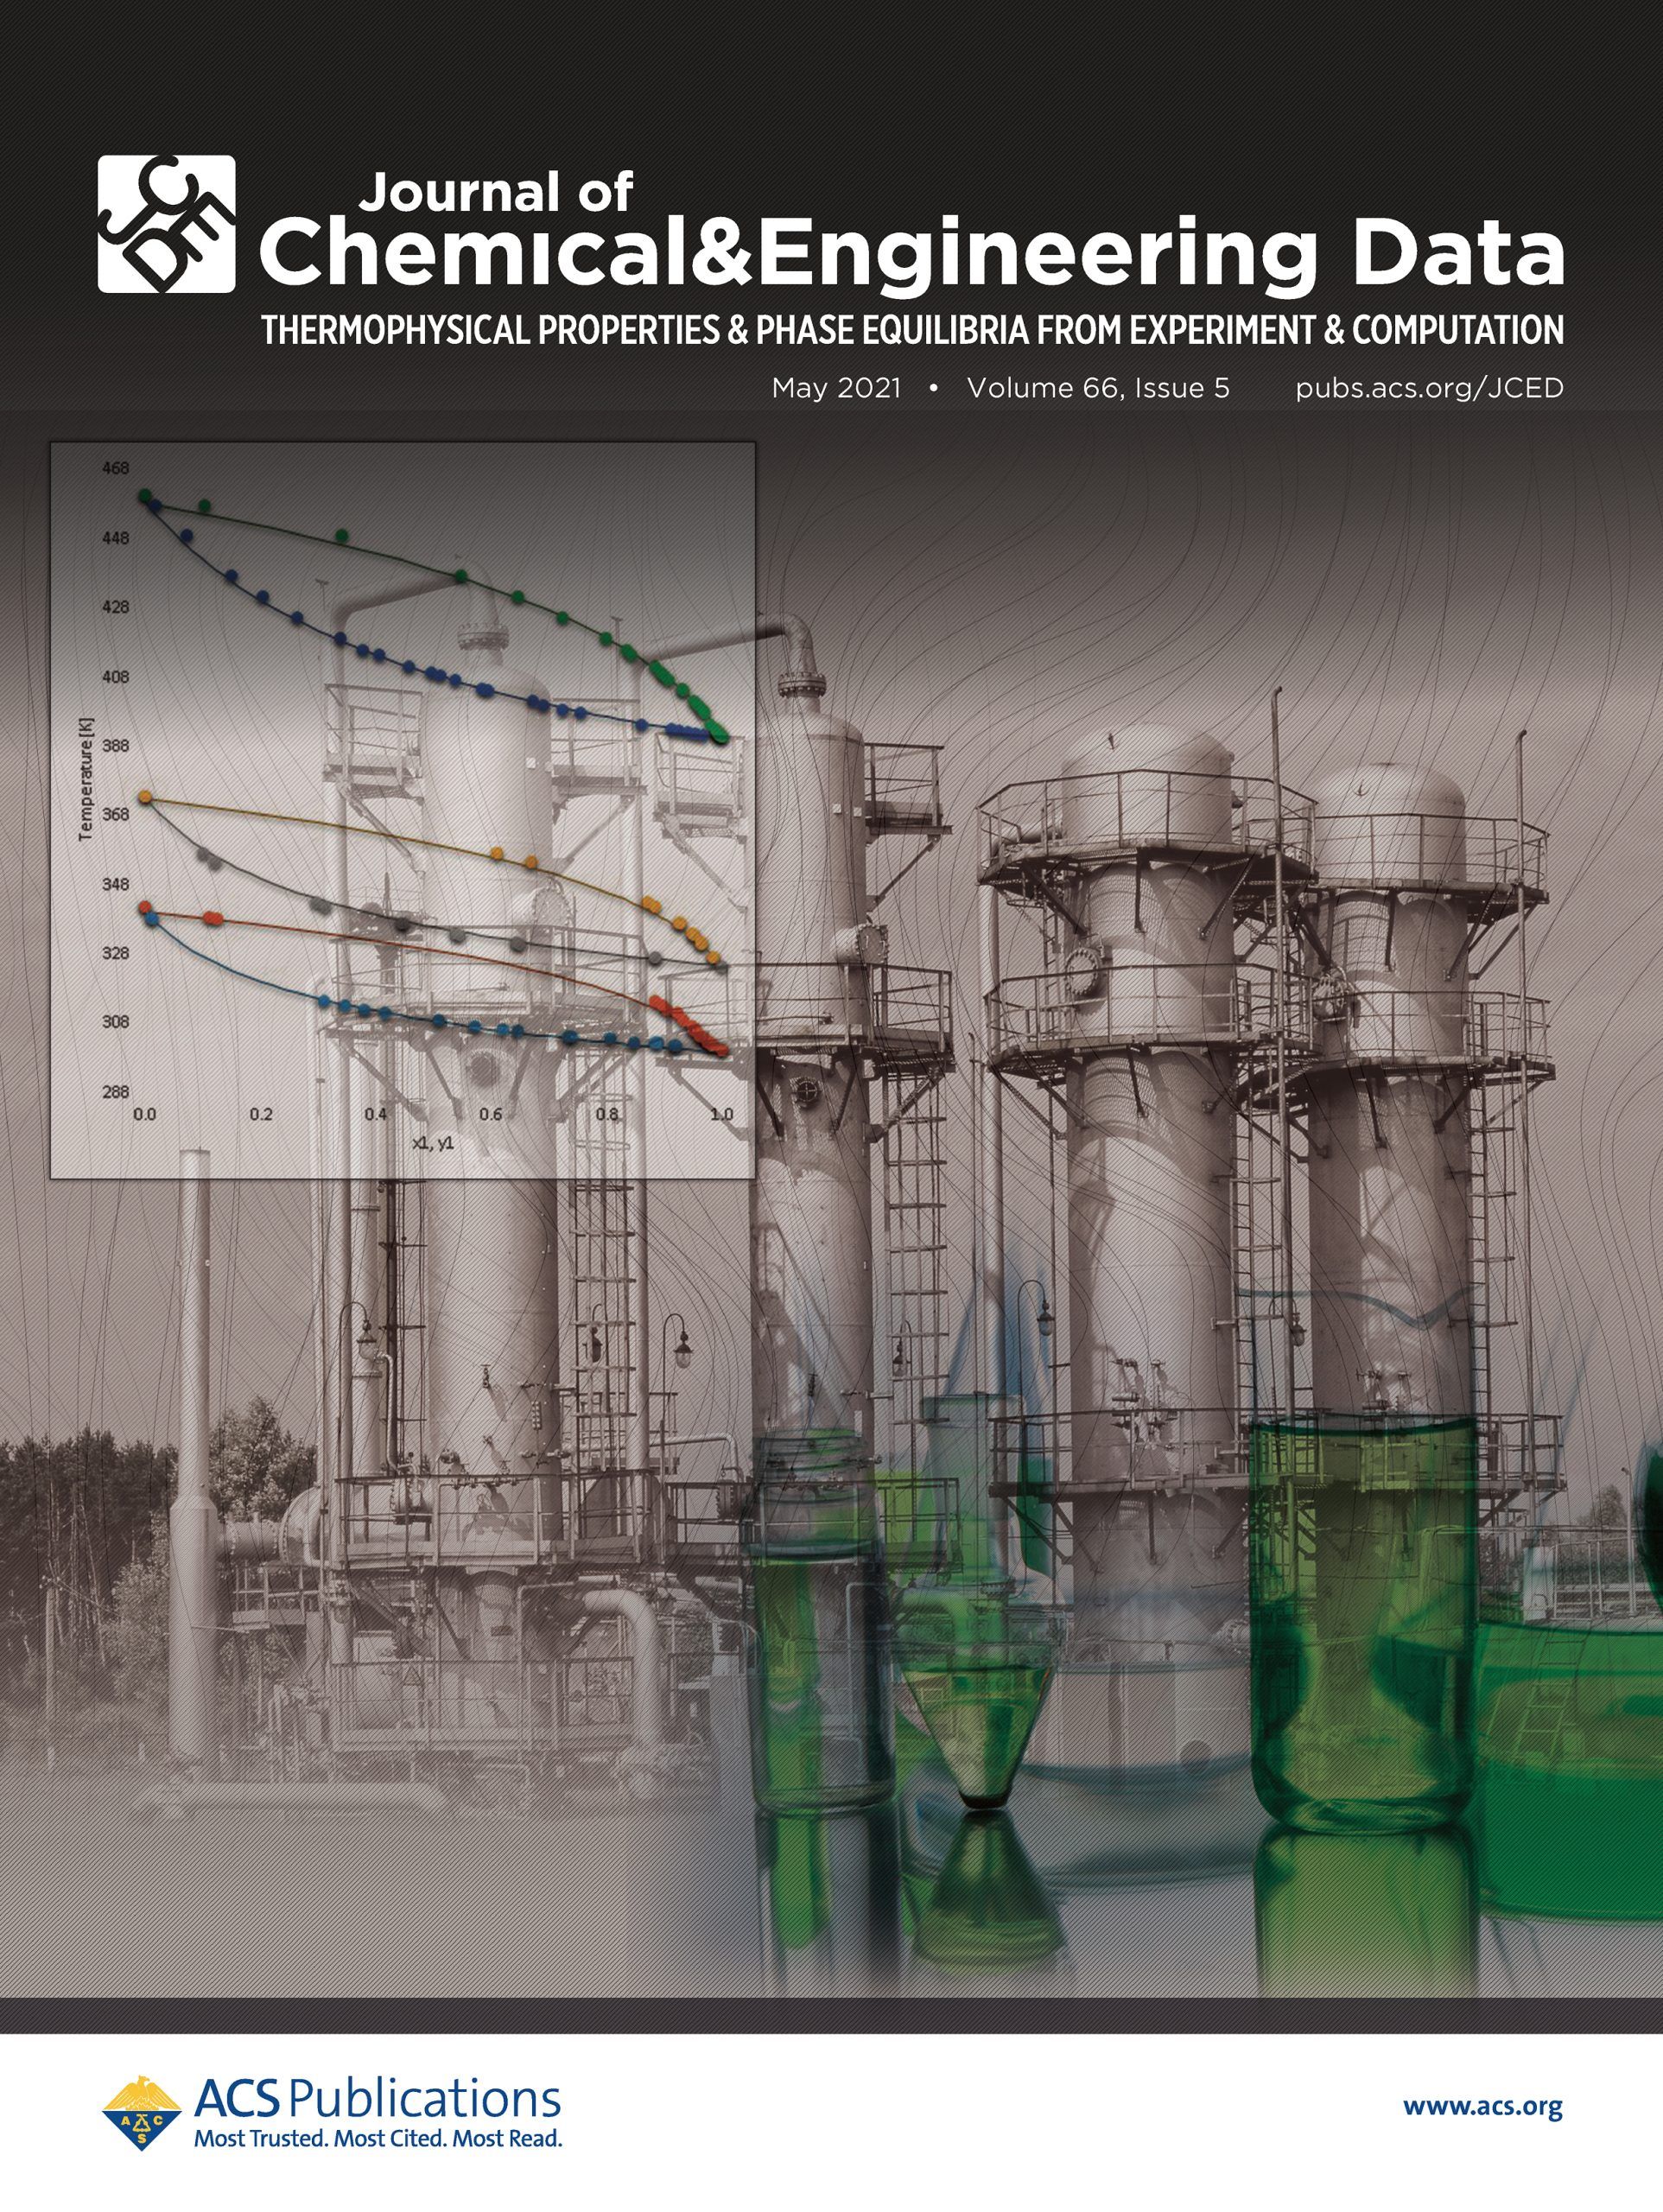 Journal of Chemical & Engineering Data cover